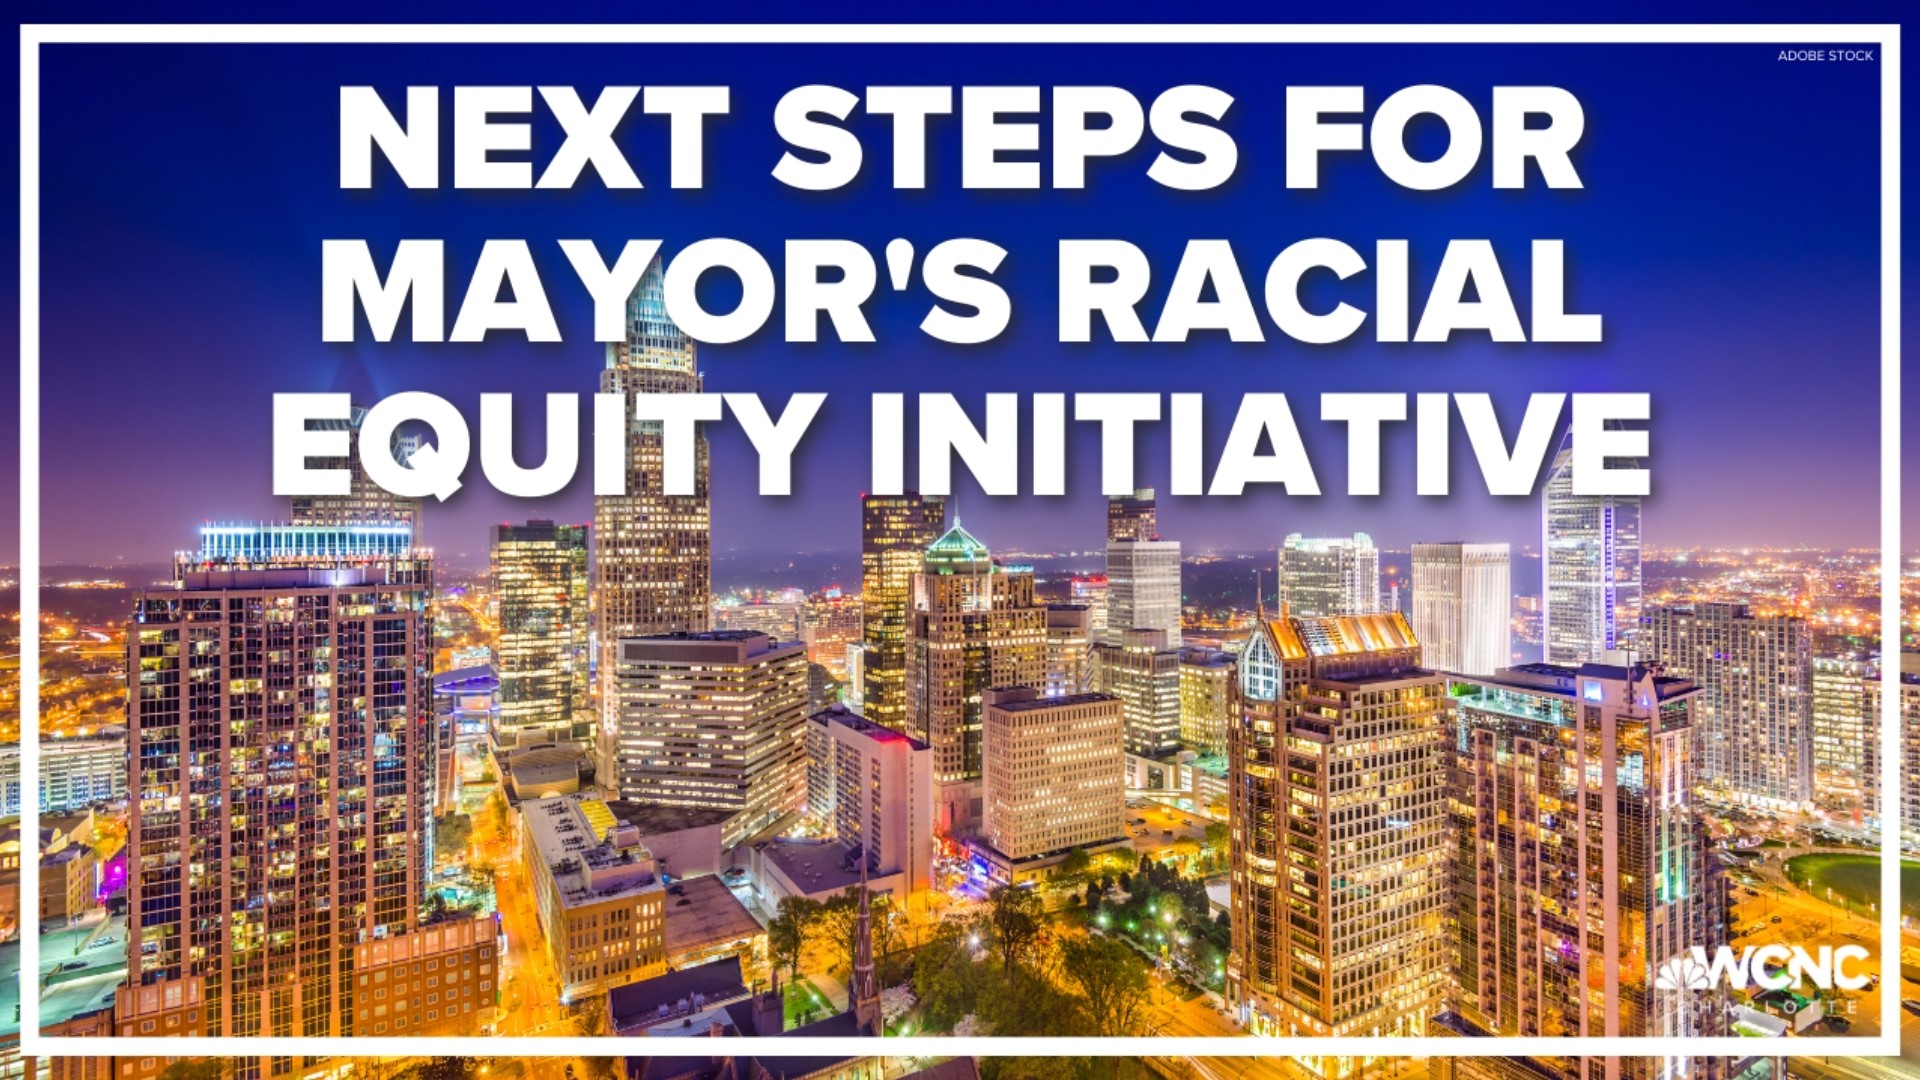 Months after the announcement of initiative, plans are now moving forward to address the city's inequities and remove barriers to opportunities.